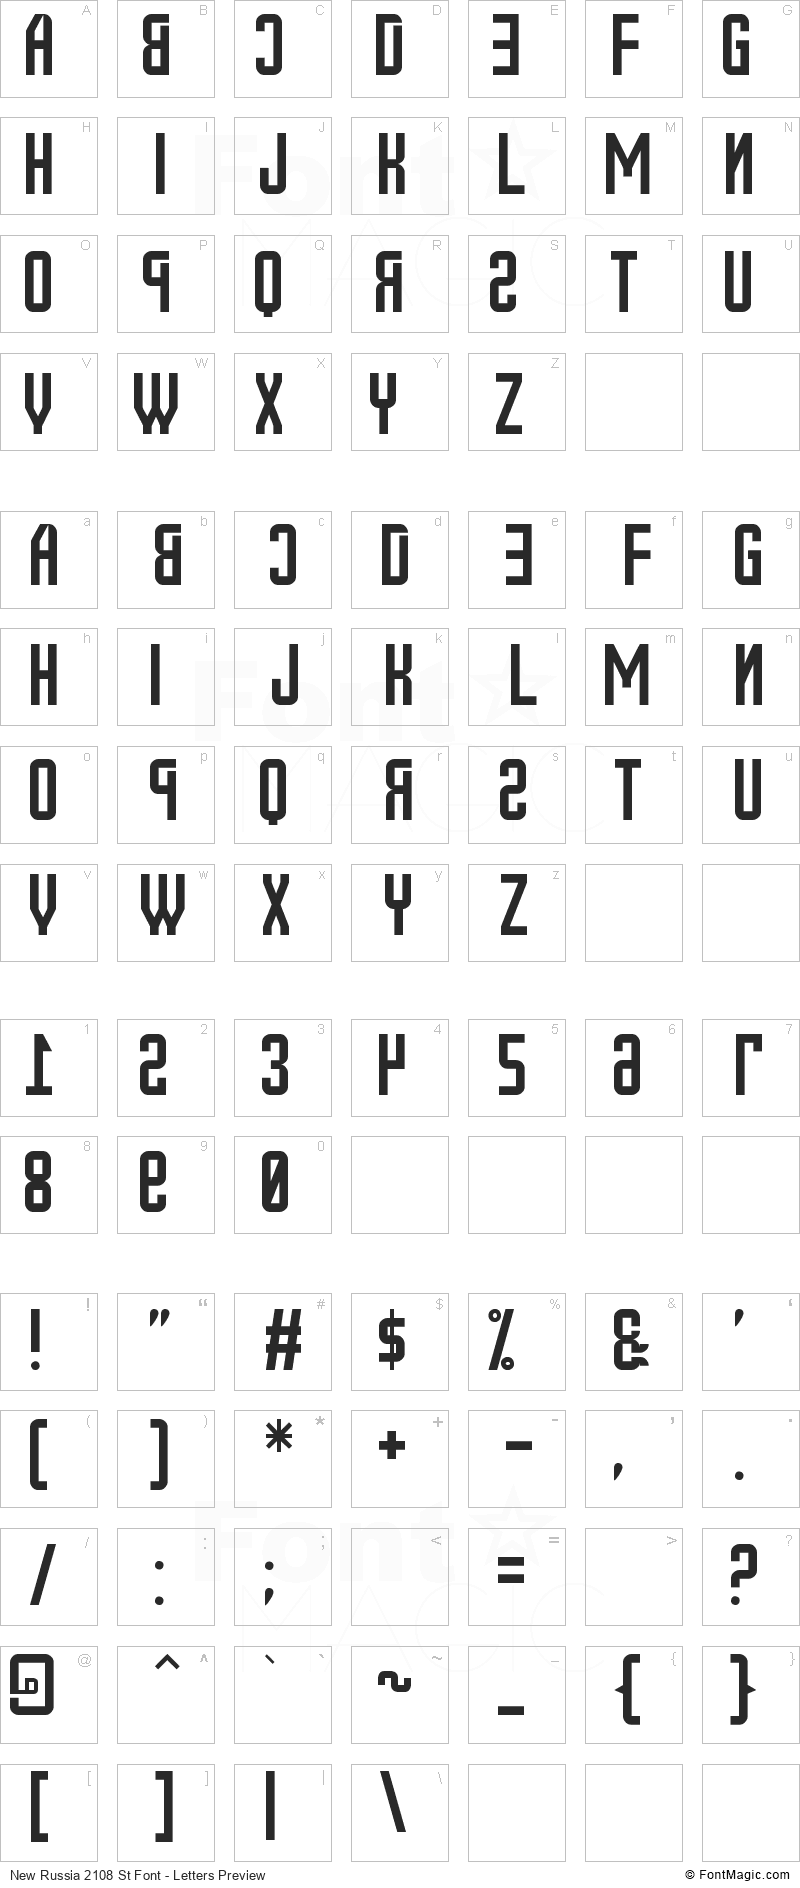 New Russia 2108 St Font - All Latters Preview Chart